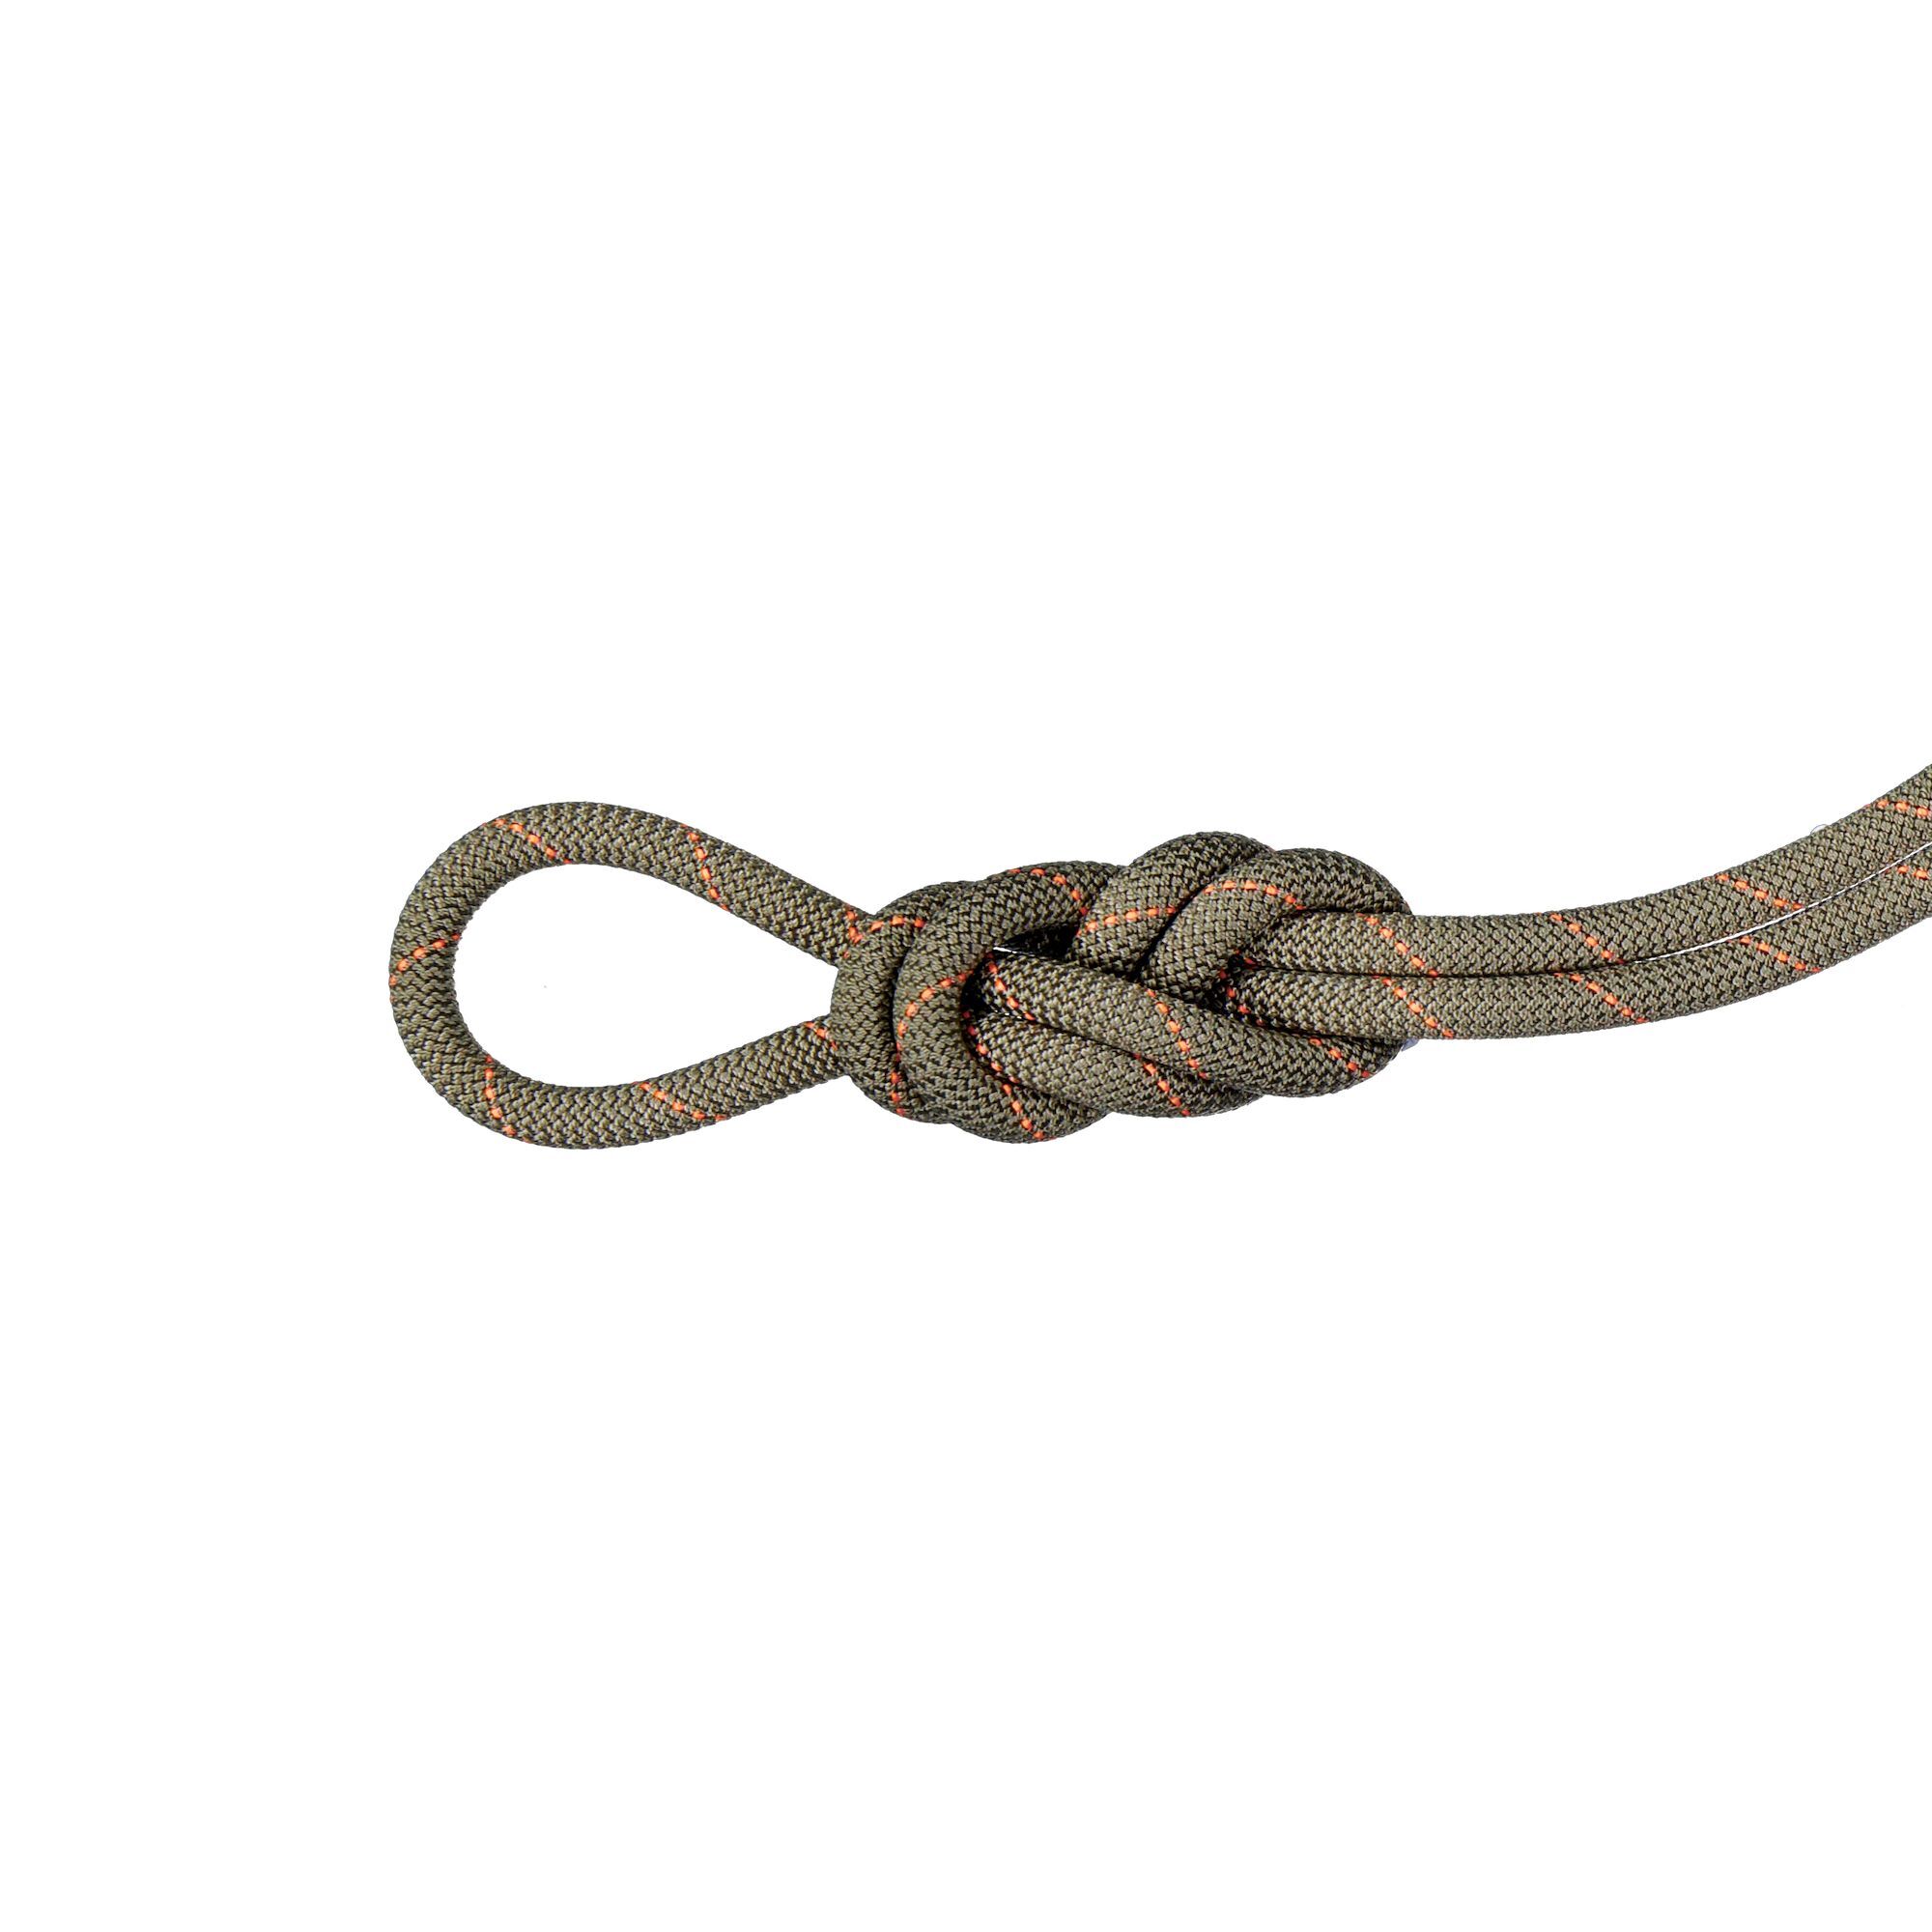 Mammut 9.9 Gym Workhorse Classic Rope - Corde à simple | Hardloop